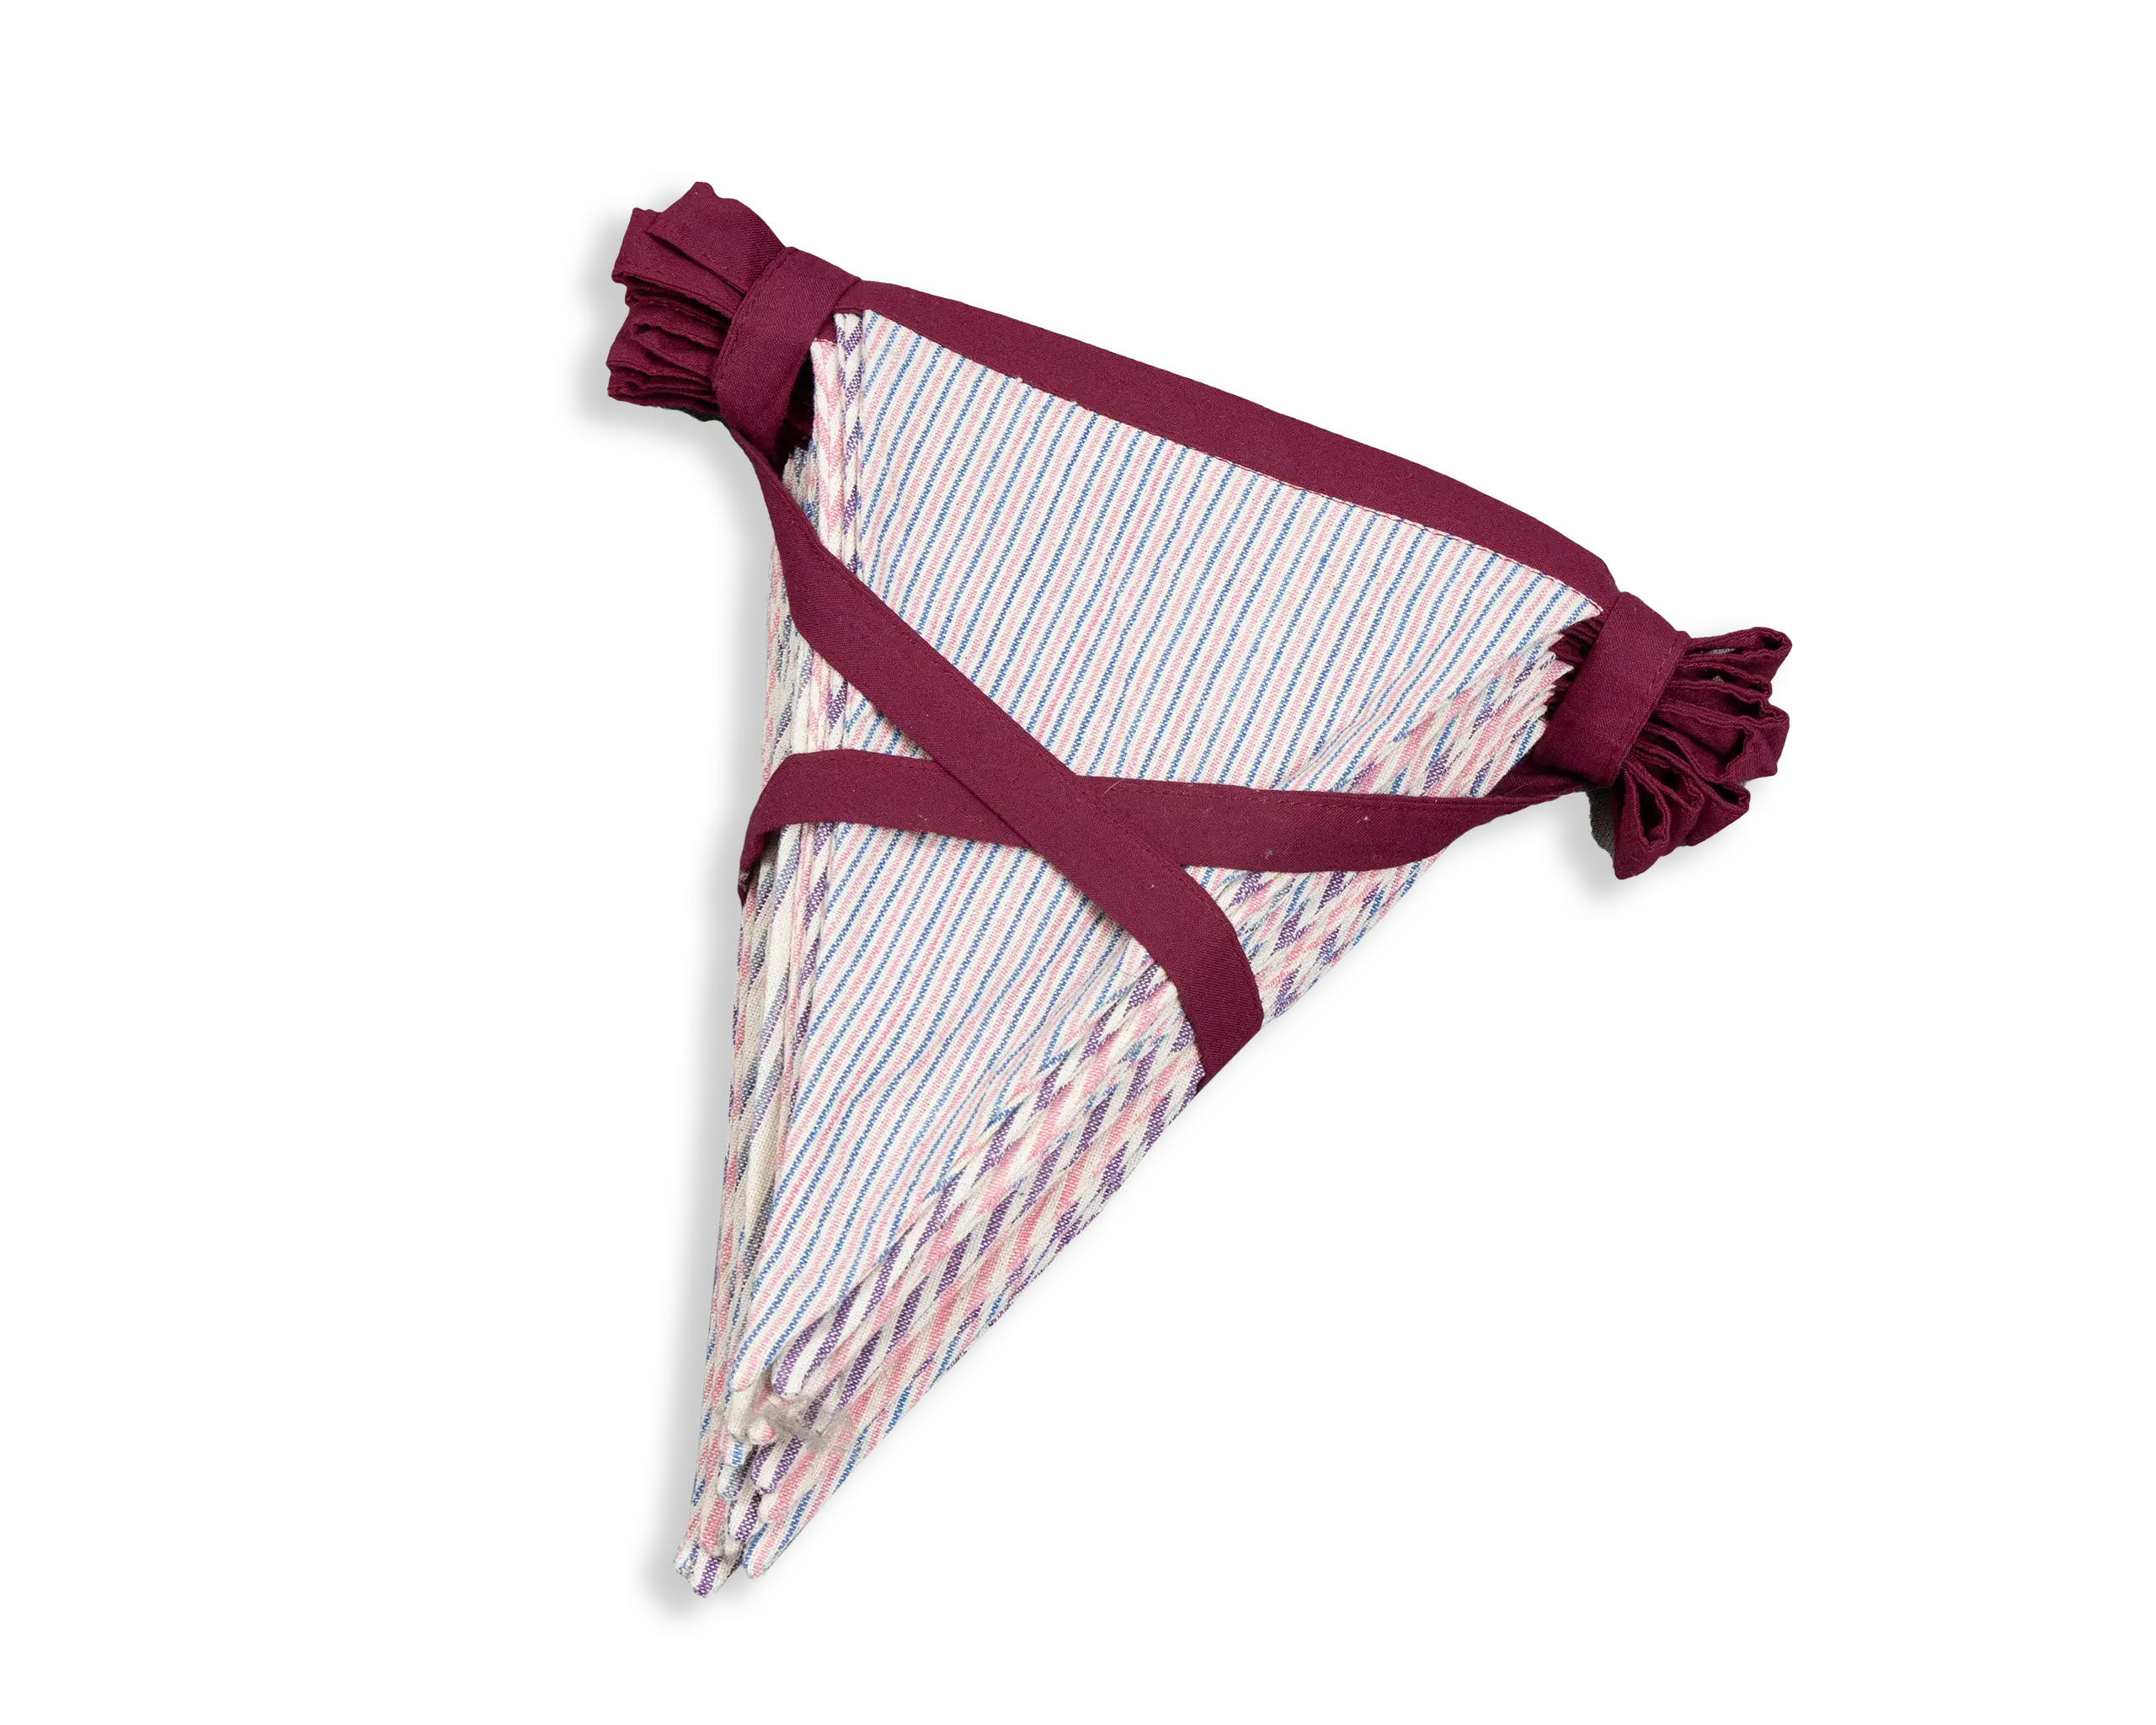 Kokroma Bunting is a sustainable way to decorate your Kid's room made with a 100% handmade Cotton Stripe design. 